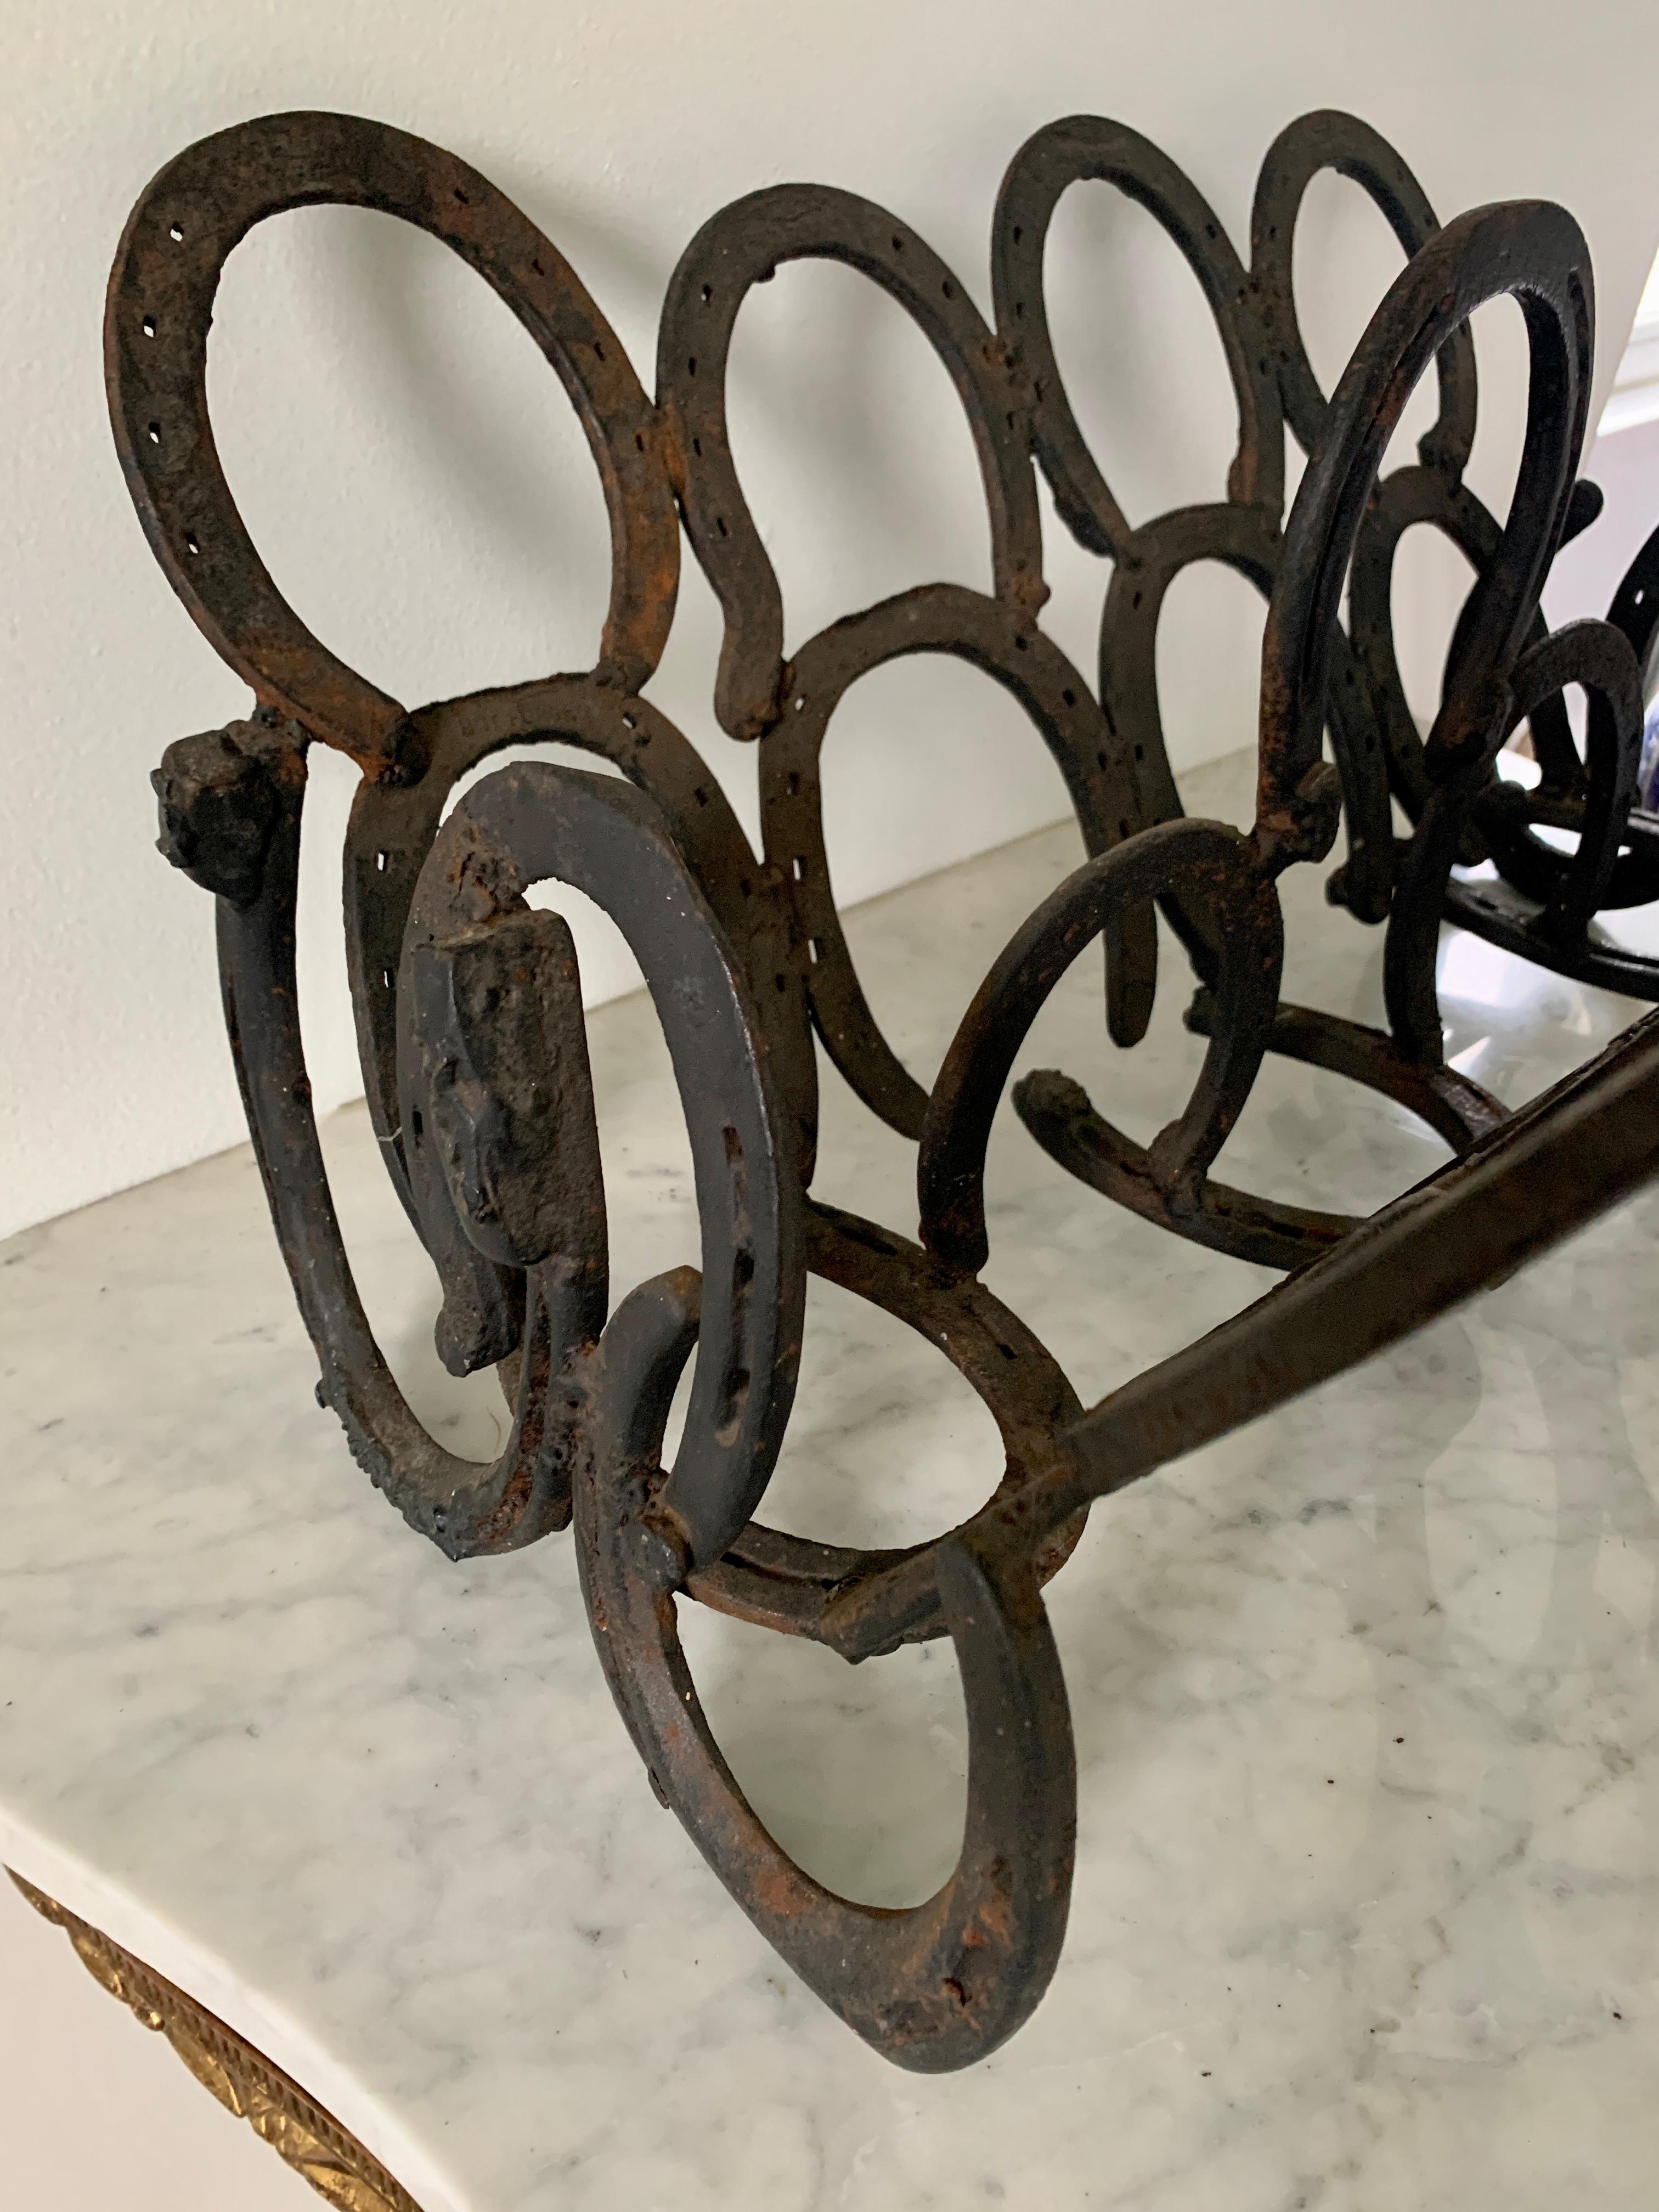 Vintage Equestrian Hand Forged Cast Iron Horseshoe Magazine Rack or Book Stand For Sale 1